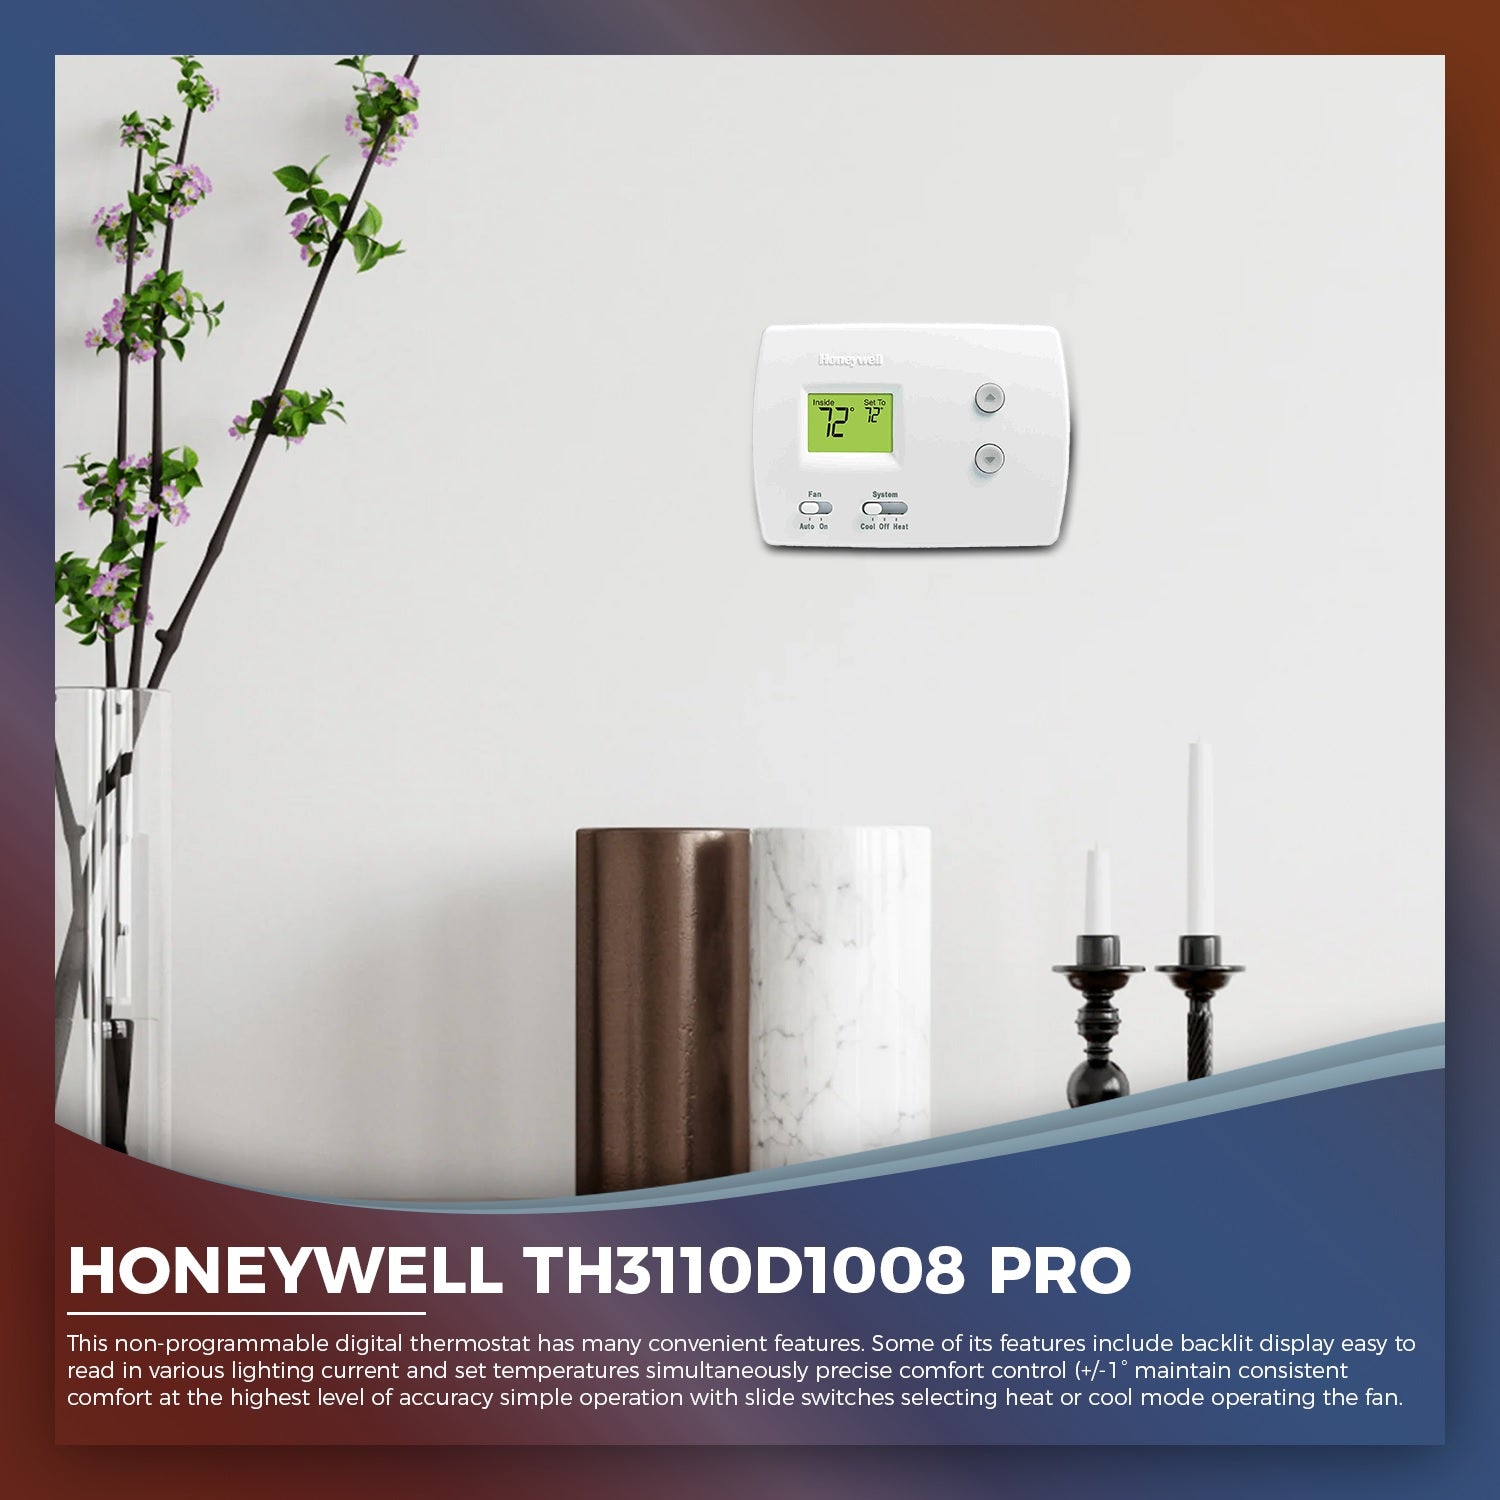 Honeywell TH3110D1008 Pro Non-Programmable Digital Thermostat, 1 Pack, White